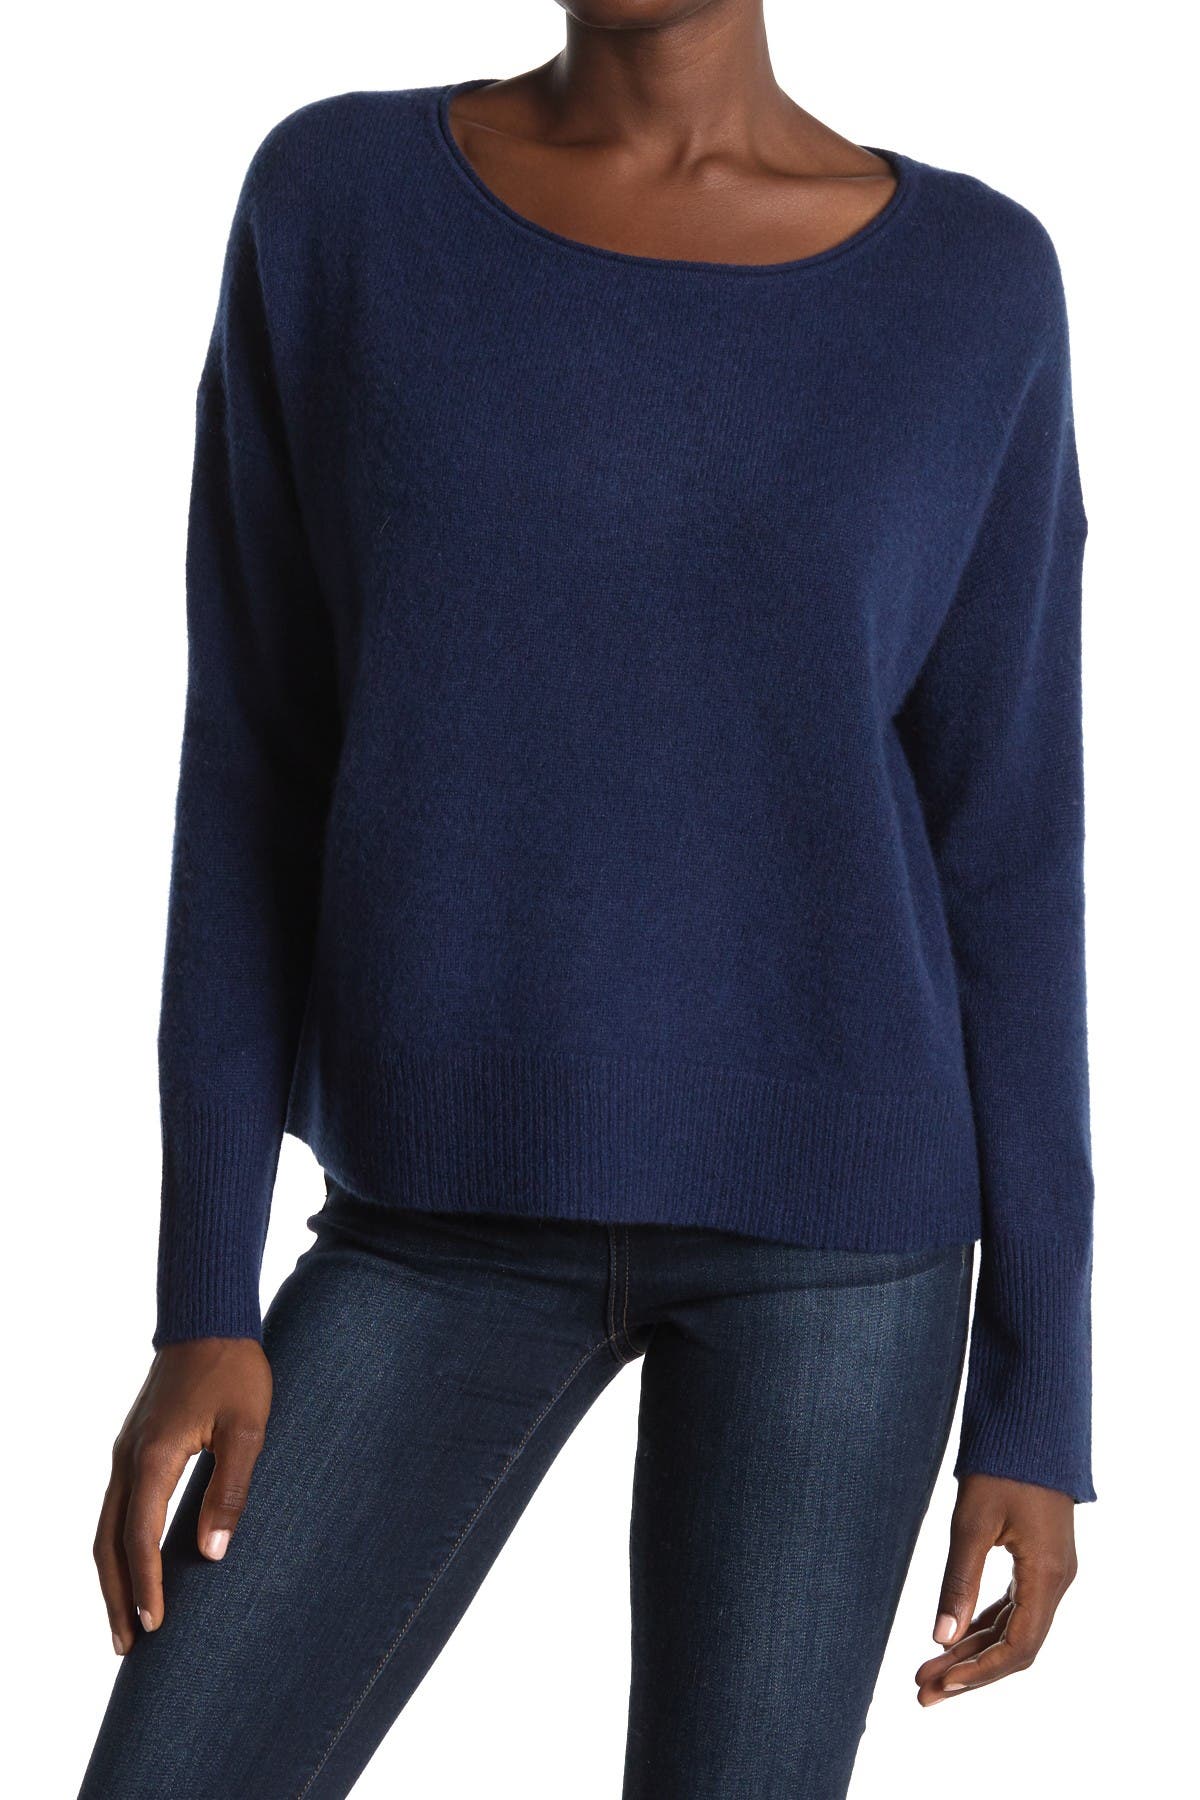 360 Cashmere | Greyson Anchor Graphic Cashmere Sweater | Nordstrom Rack